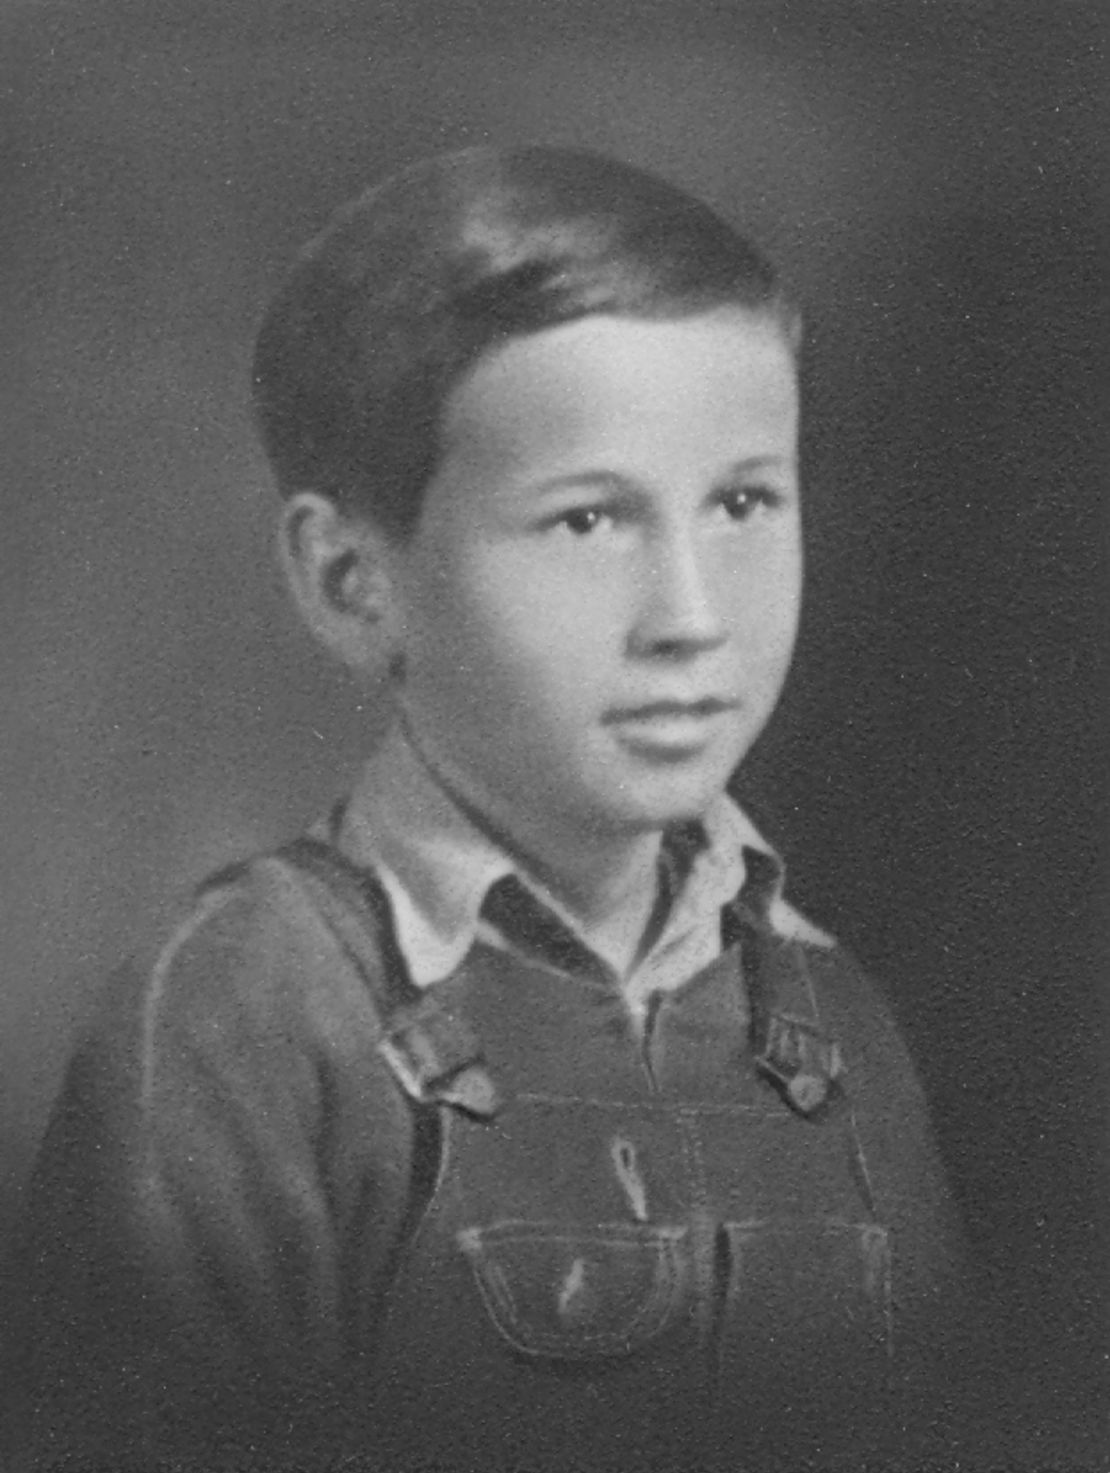 Fred Craddock in grade school, where he struggled to hide his poverty from classmates.